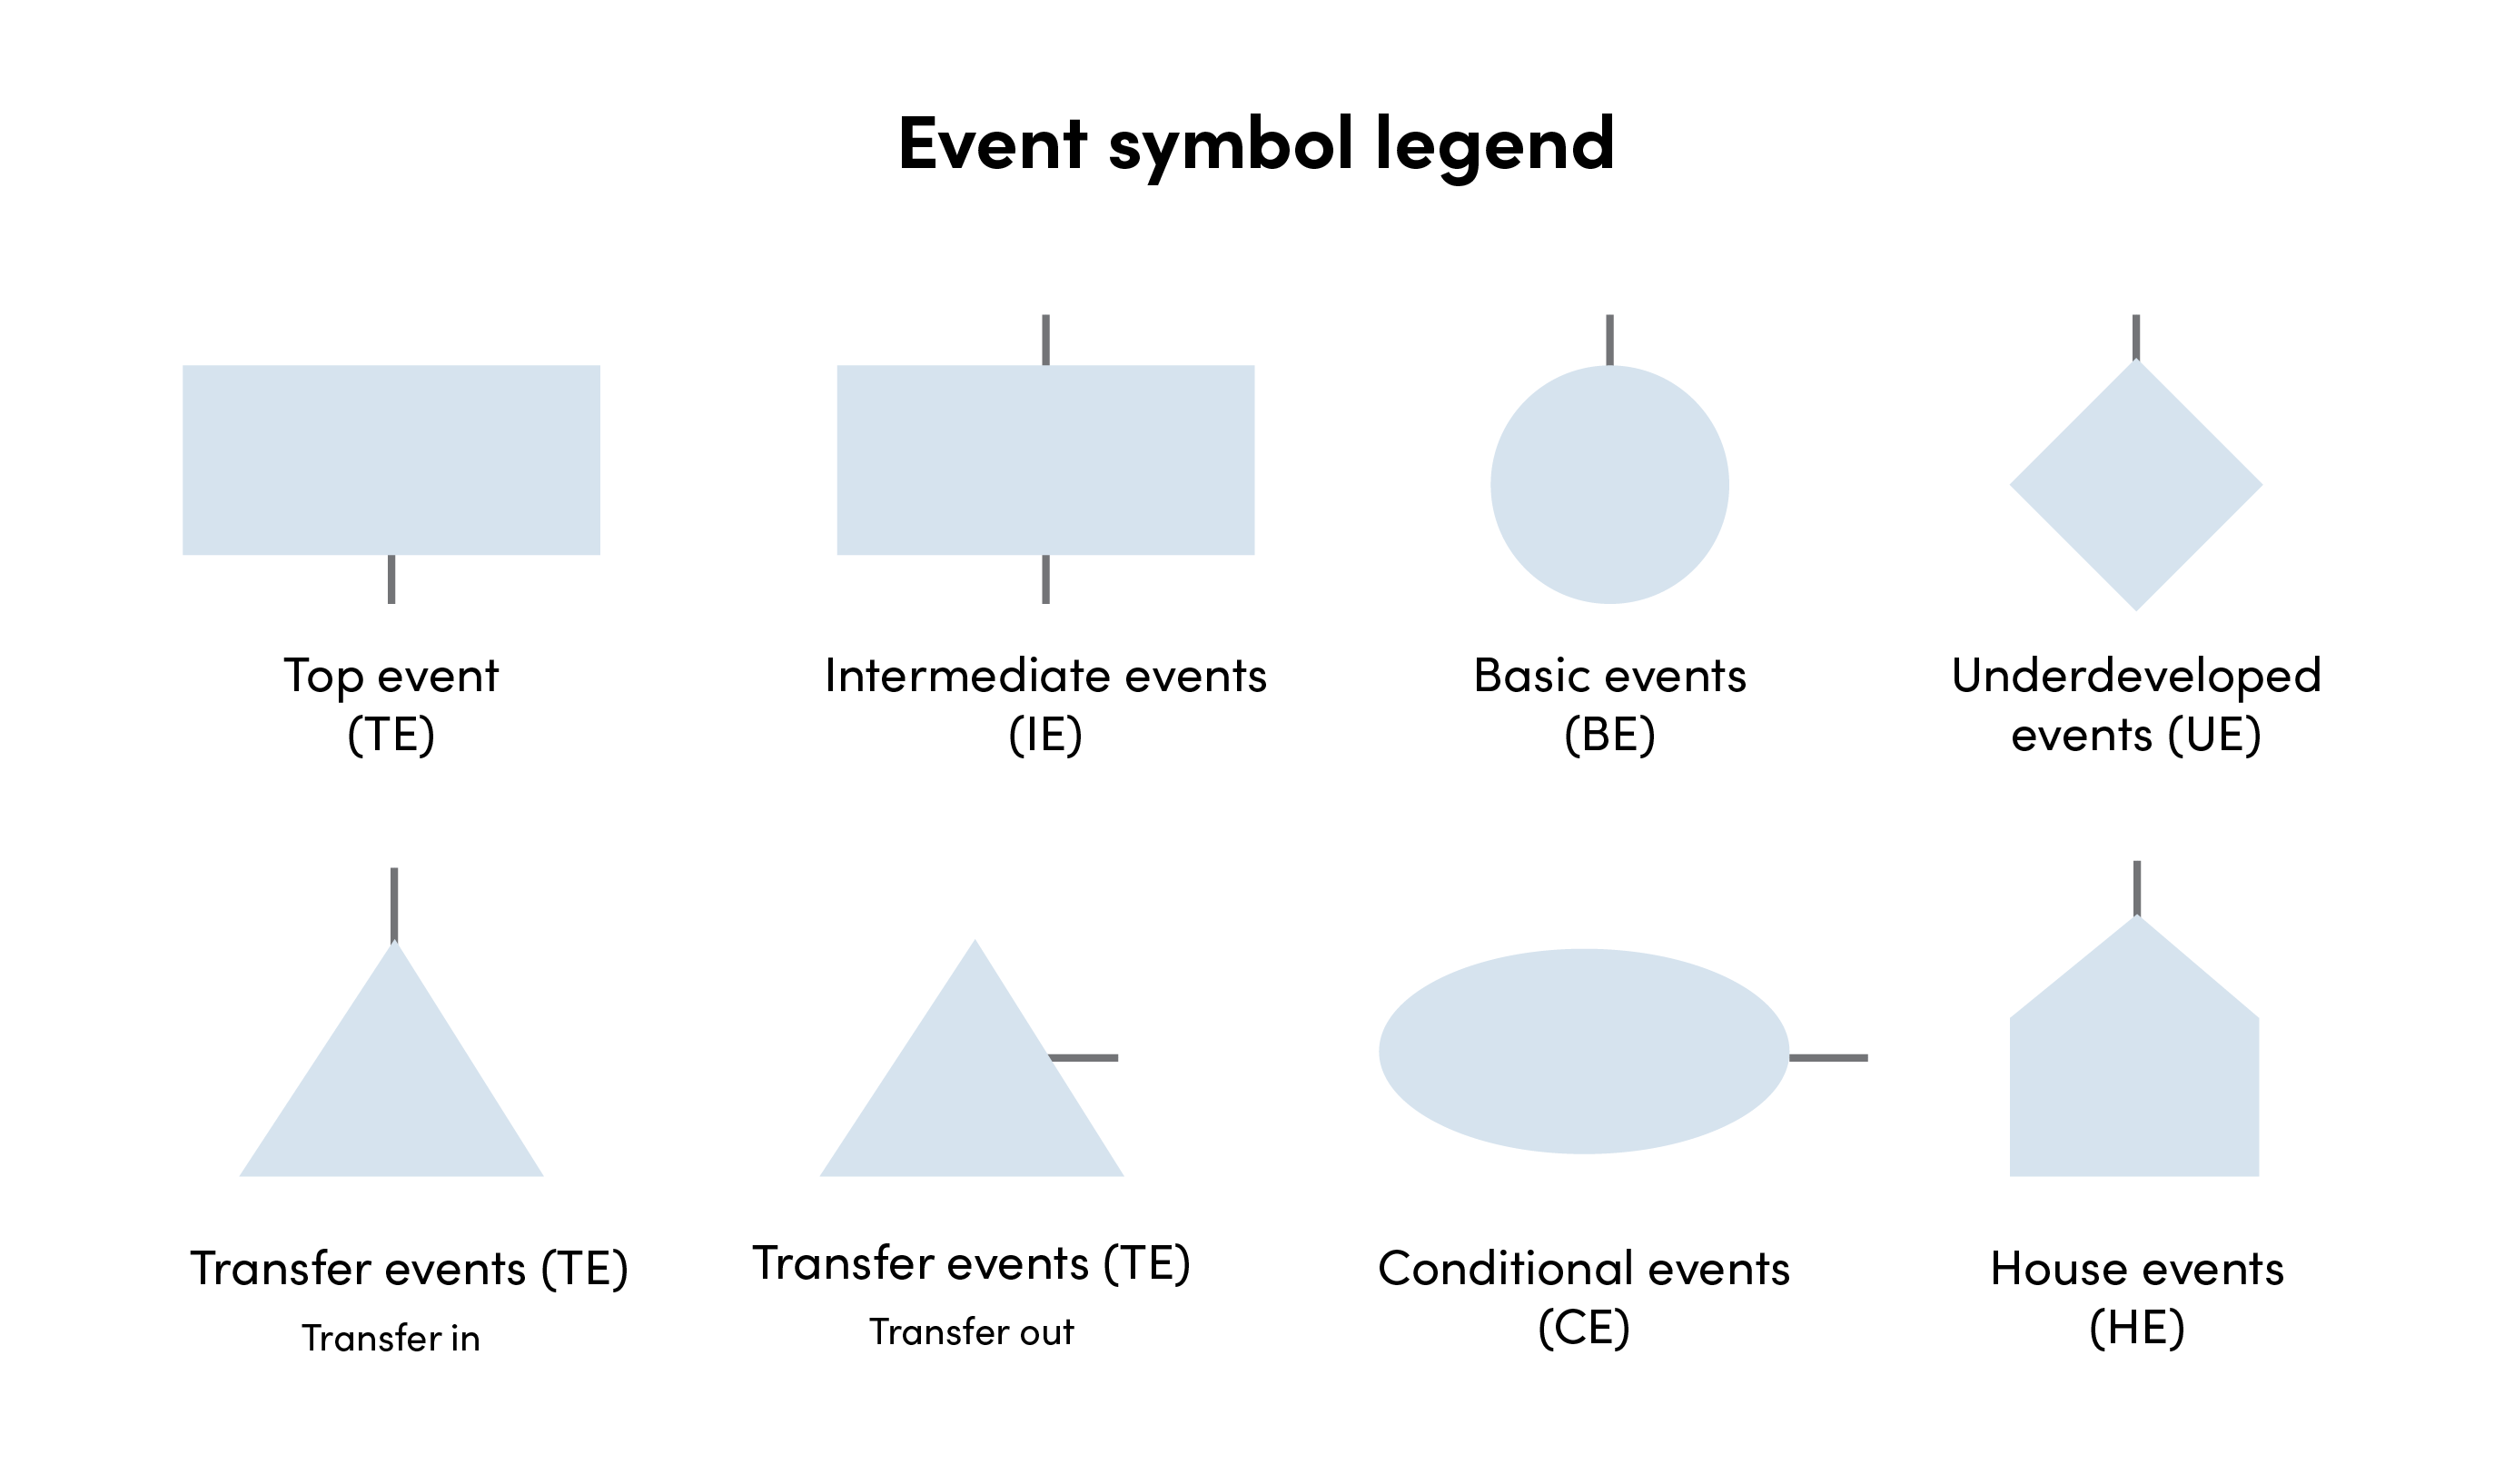 The image shows the types of events that are used in fault tree diagrams.